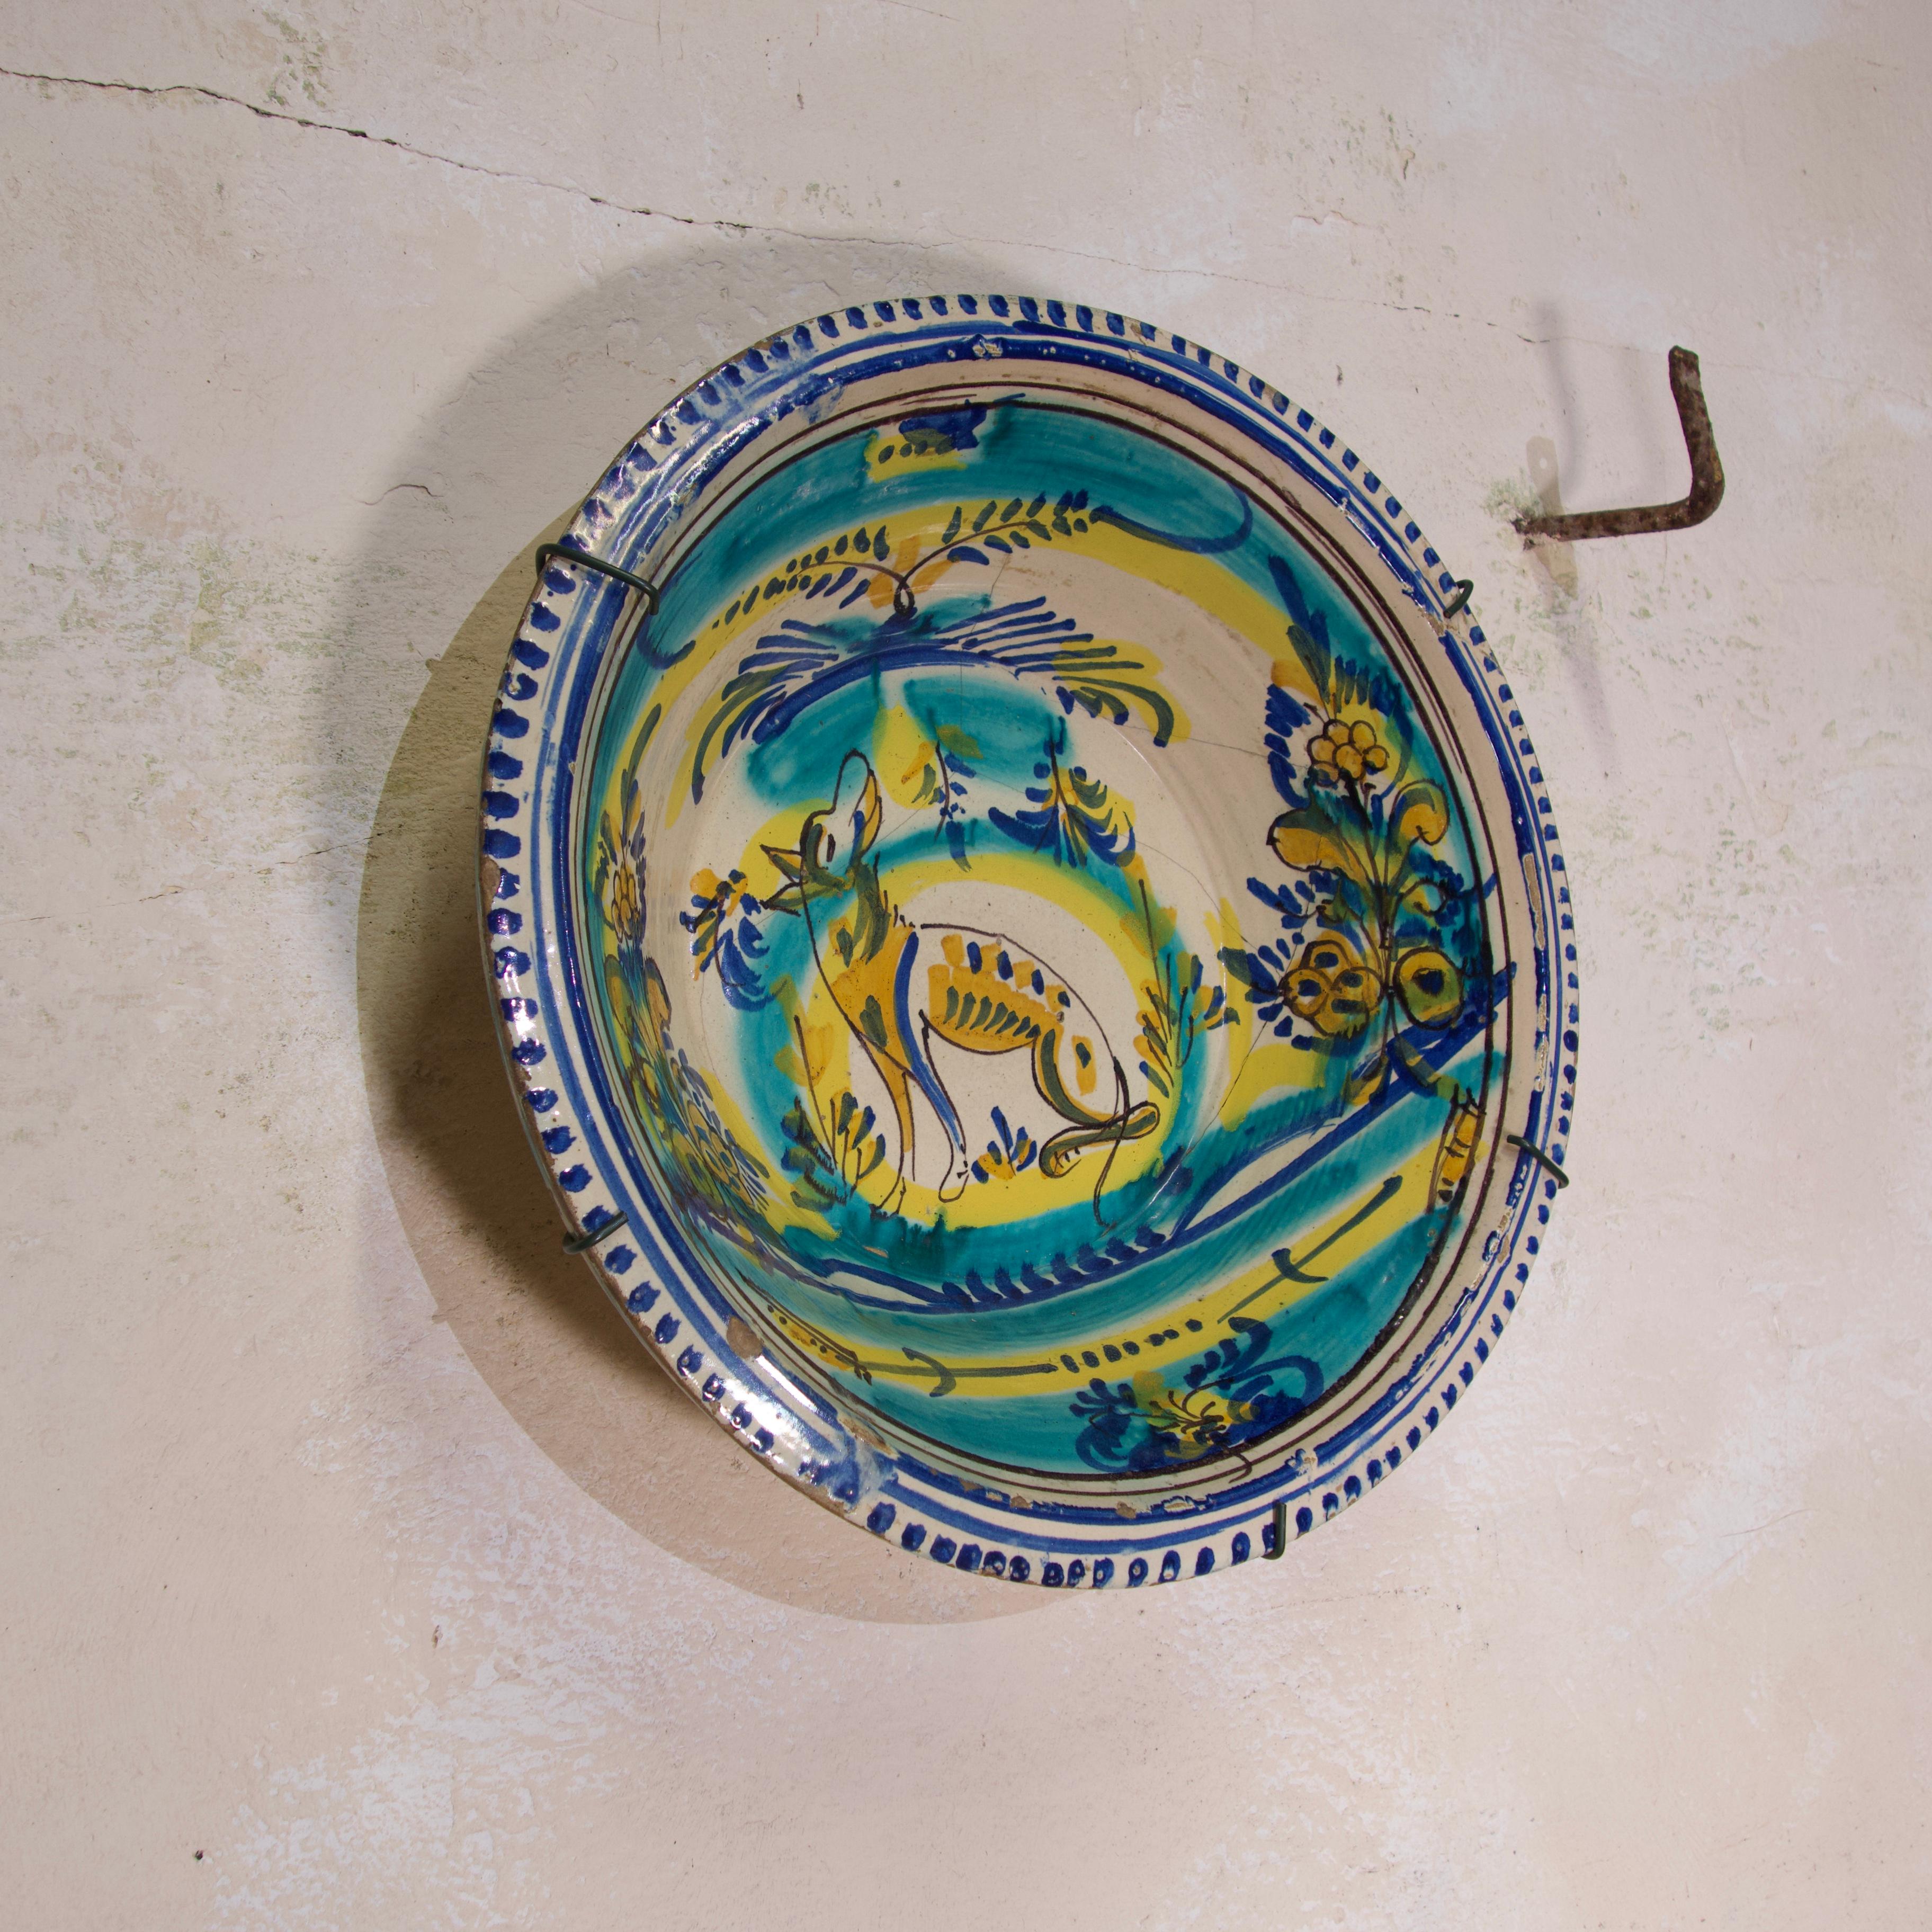 A large 19th century Spanish lebrillo from Triana. Of gently flared circular shape, painted in turquoise, blue and yellow with a central dog surrounded by flowers and foliage - the rim present with blue line and dash detailing.